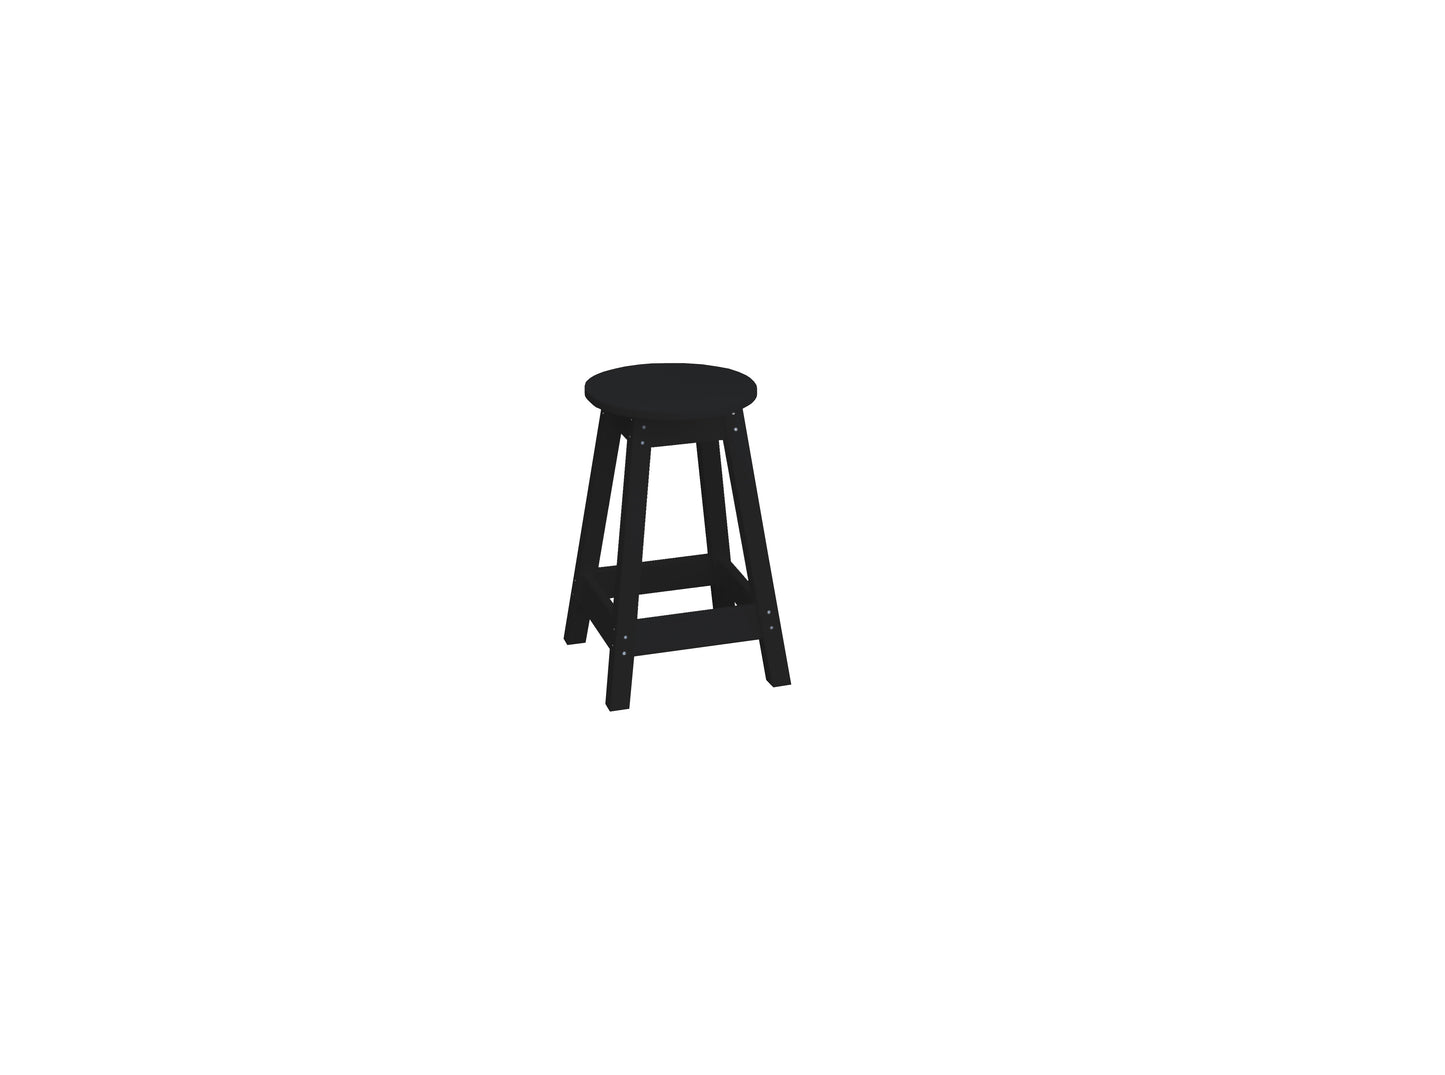 A&L Furniture Co. Recycled Plastic Round Bistro Stool - LEAD TIME TO SHIP 10 BUSINESS DAYS